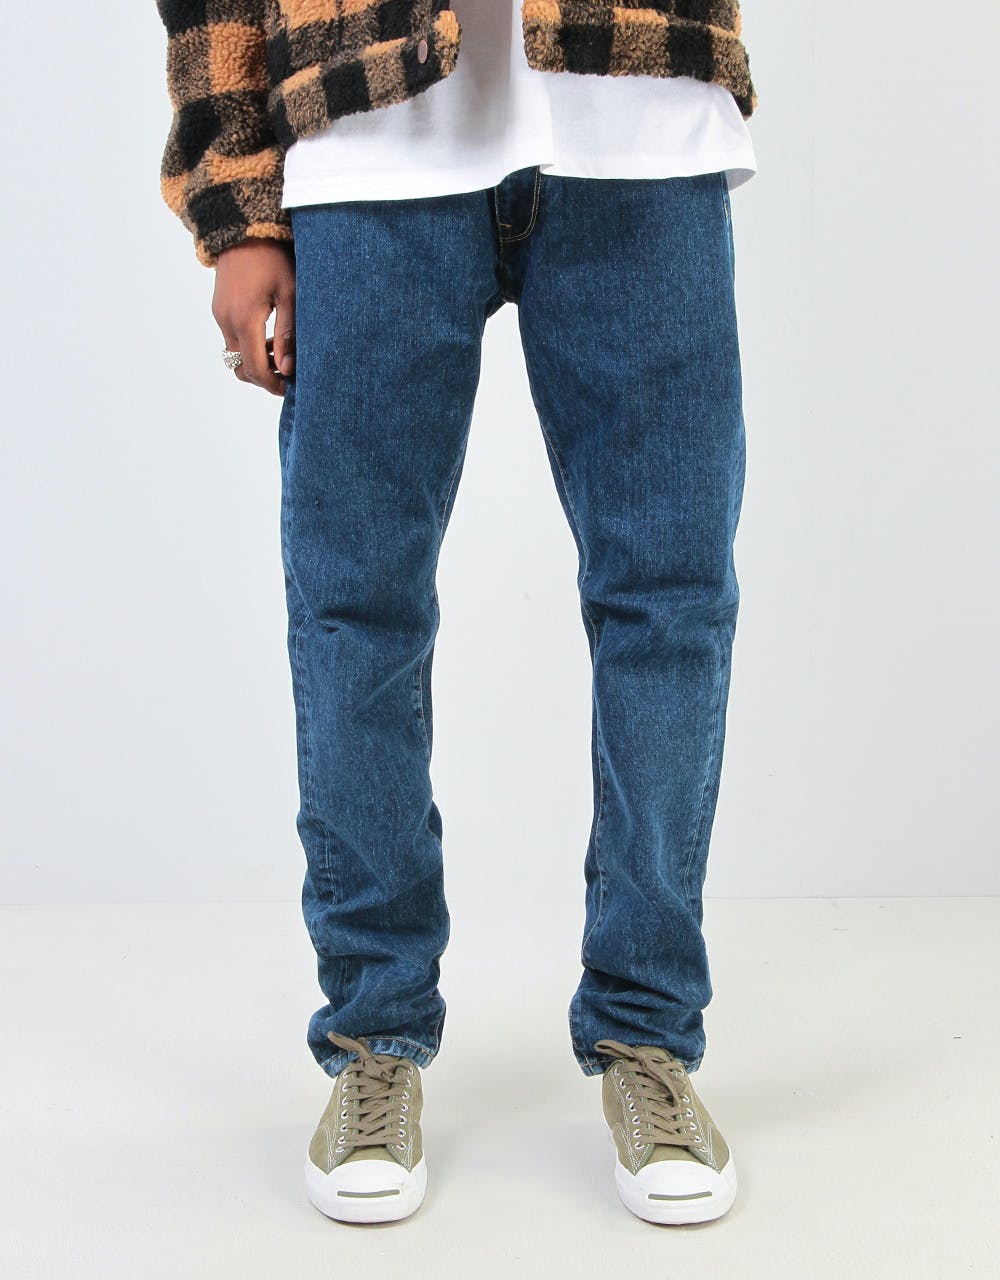 Carhartt WIP Vicious Pant - Blue Stone Washed